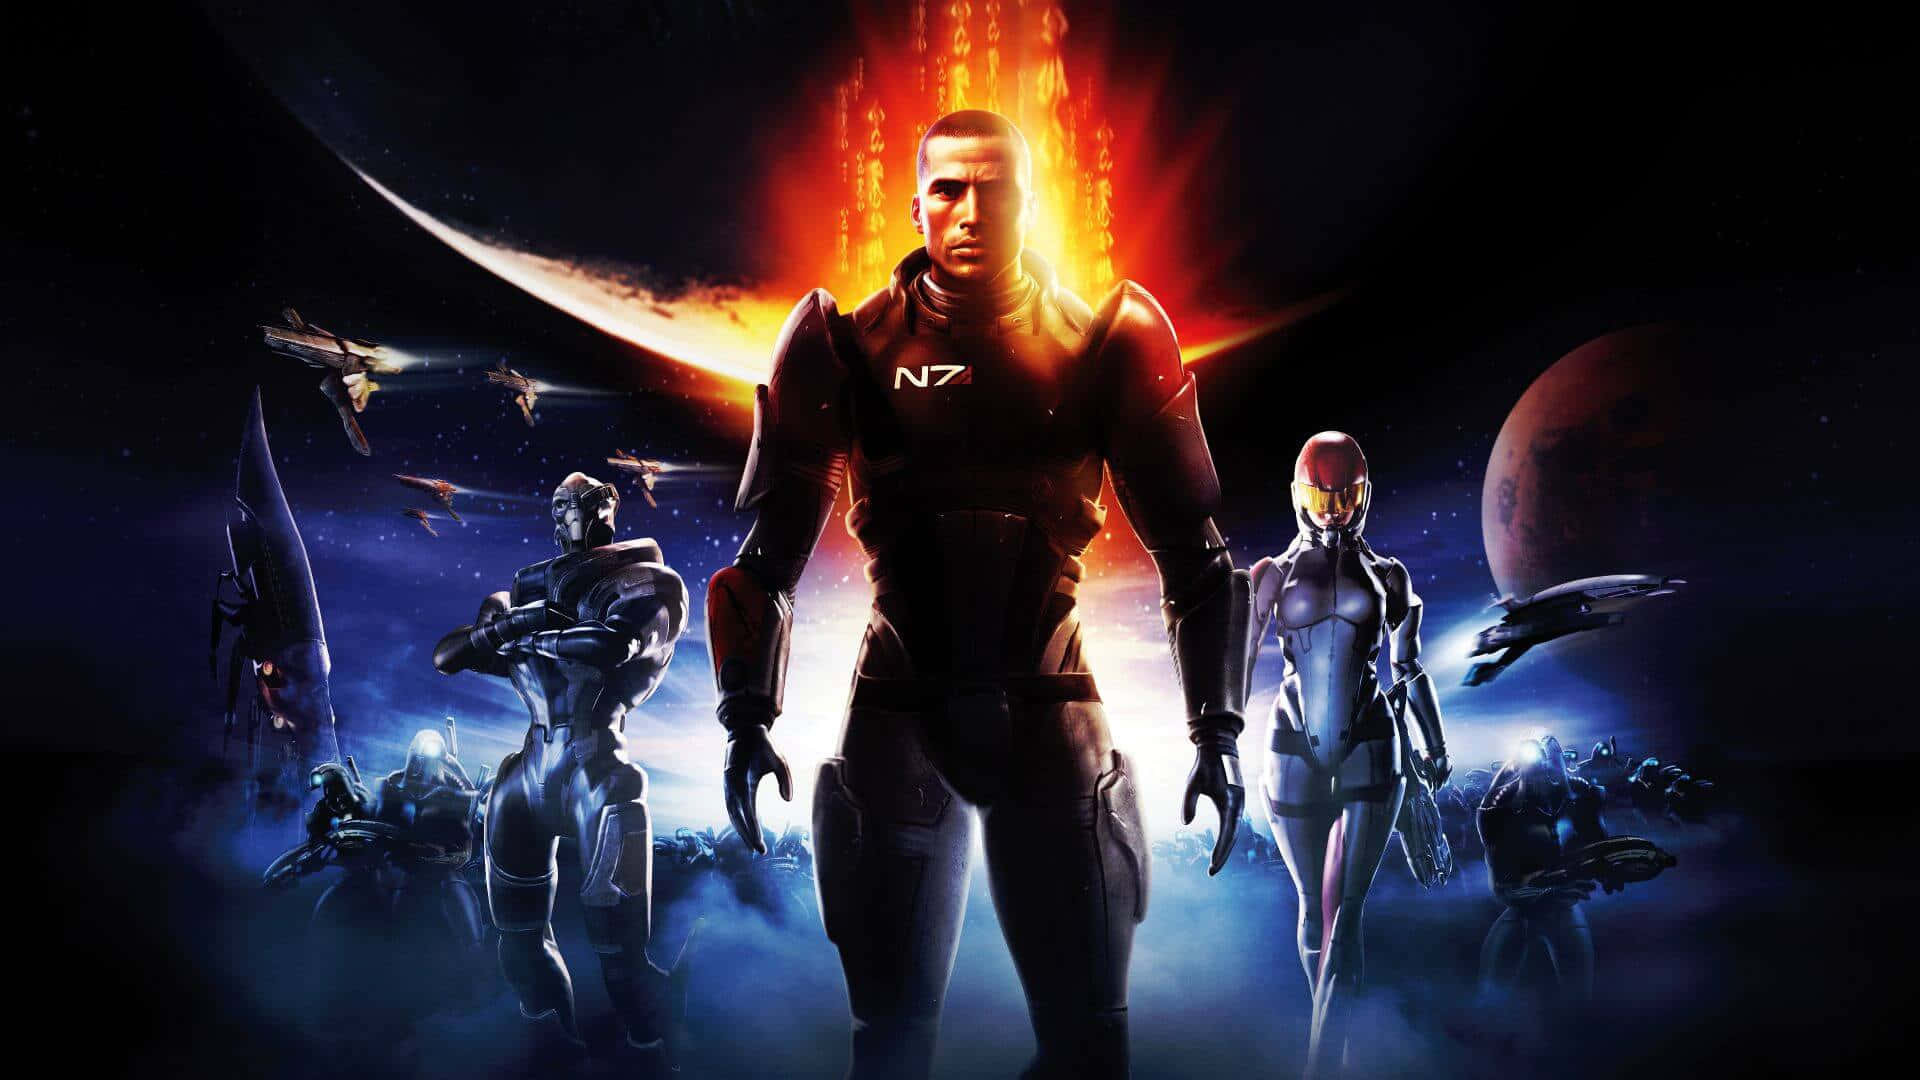 Commander Shepard leading the team on a mission in Mass Effect.